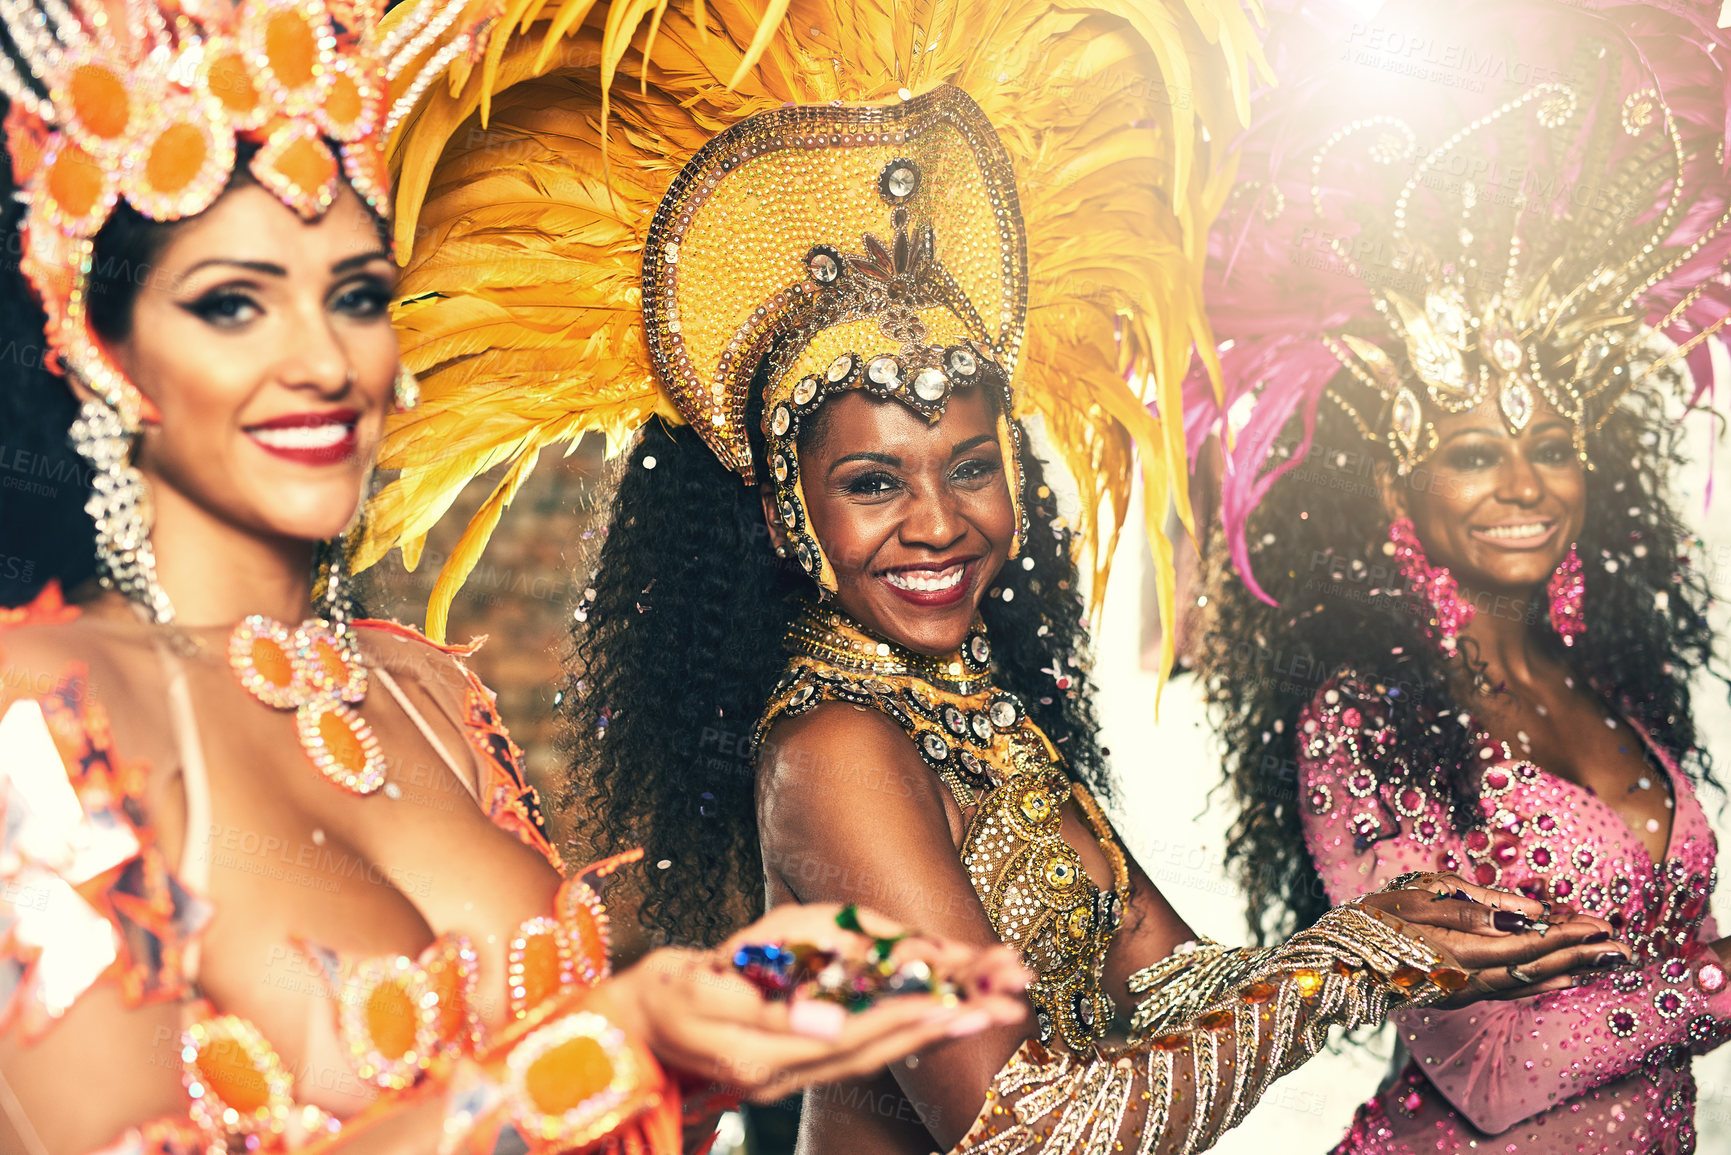 Buy stock photo Dance, samba and portrait of women at event outdoor for culture, tradition and celebration. Happy, smile and people from Brazil dancing at traditional festival, concert or carnival in Rio de Janeiro.